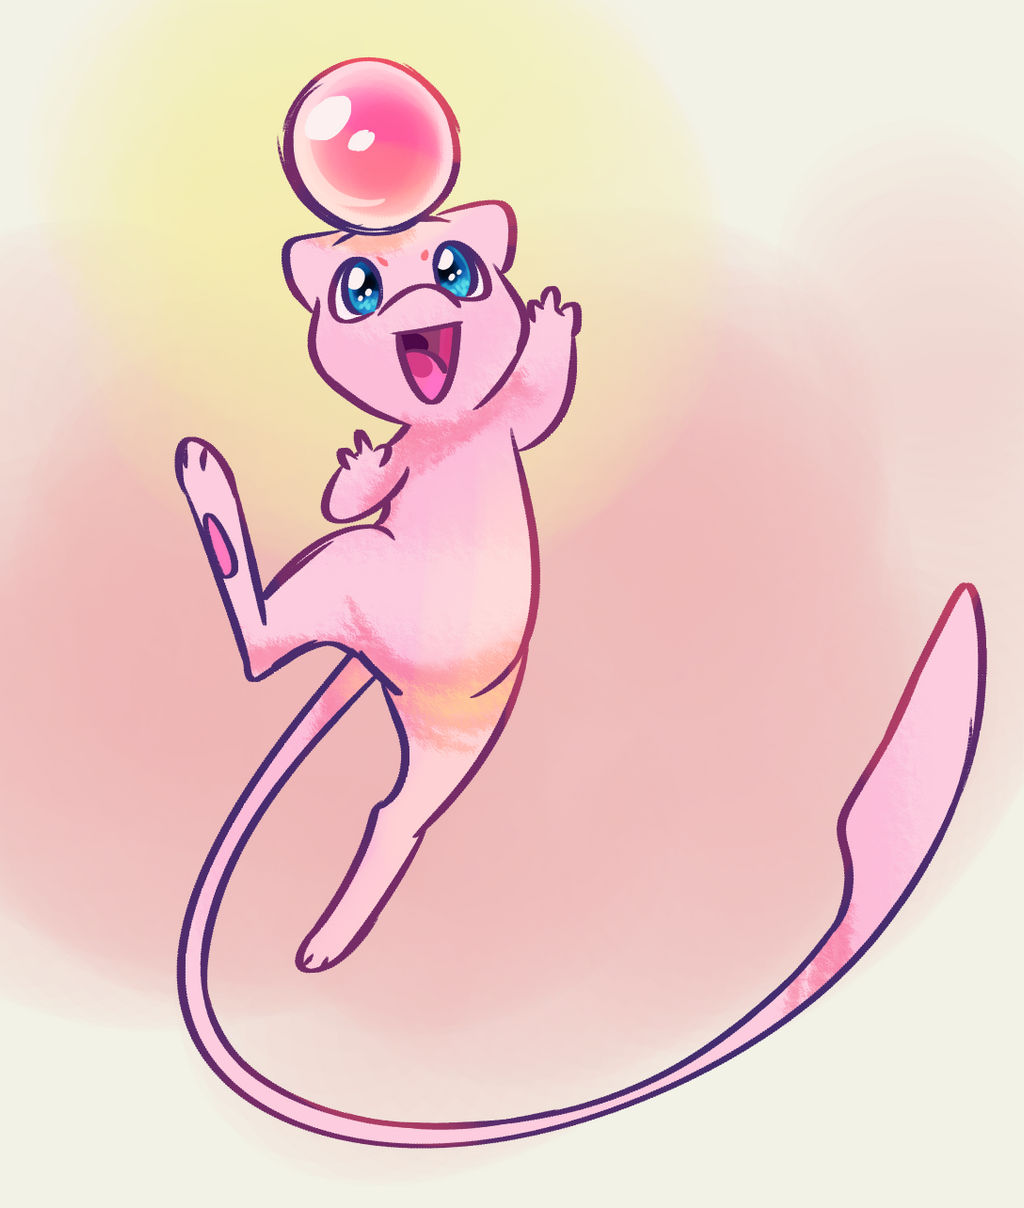 Mew Pearl by King-Pika on DeviantArt